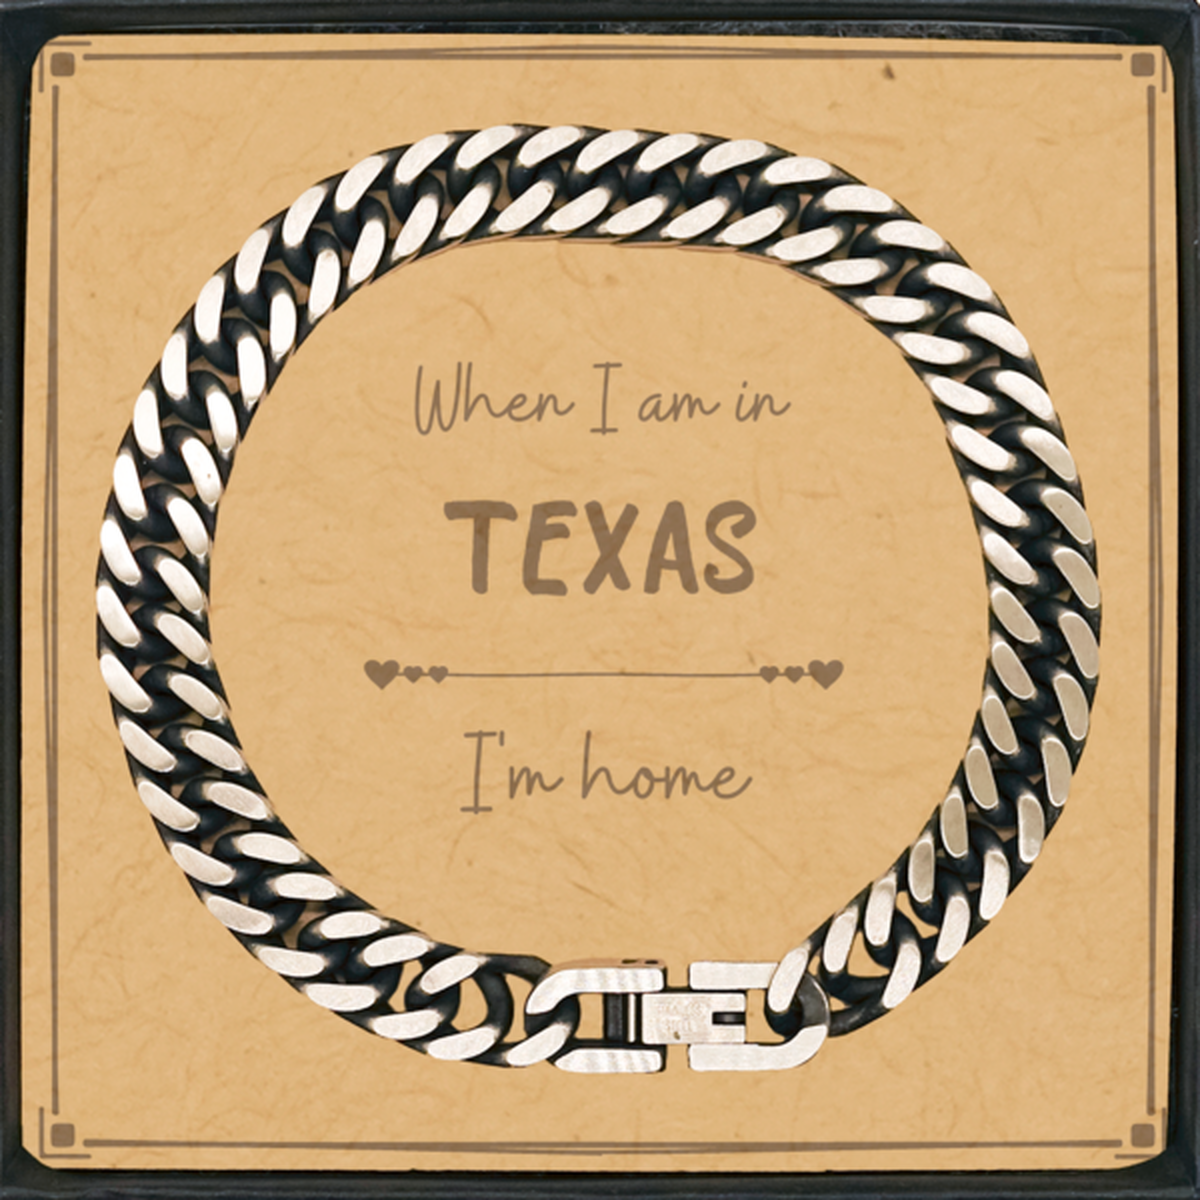 When I am in Texas I'm home Cuban Link Chain Bracelet, Message Card Gifts For Texas, State Texas Birthday Gifts for Friends Coworker